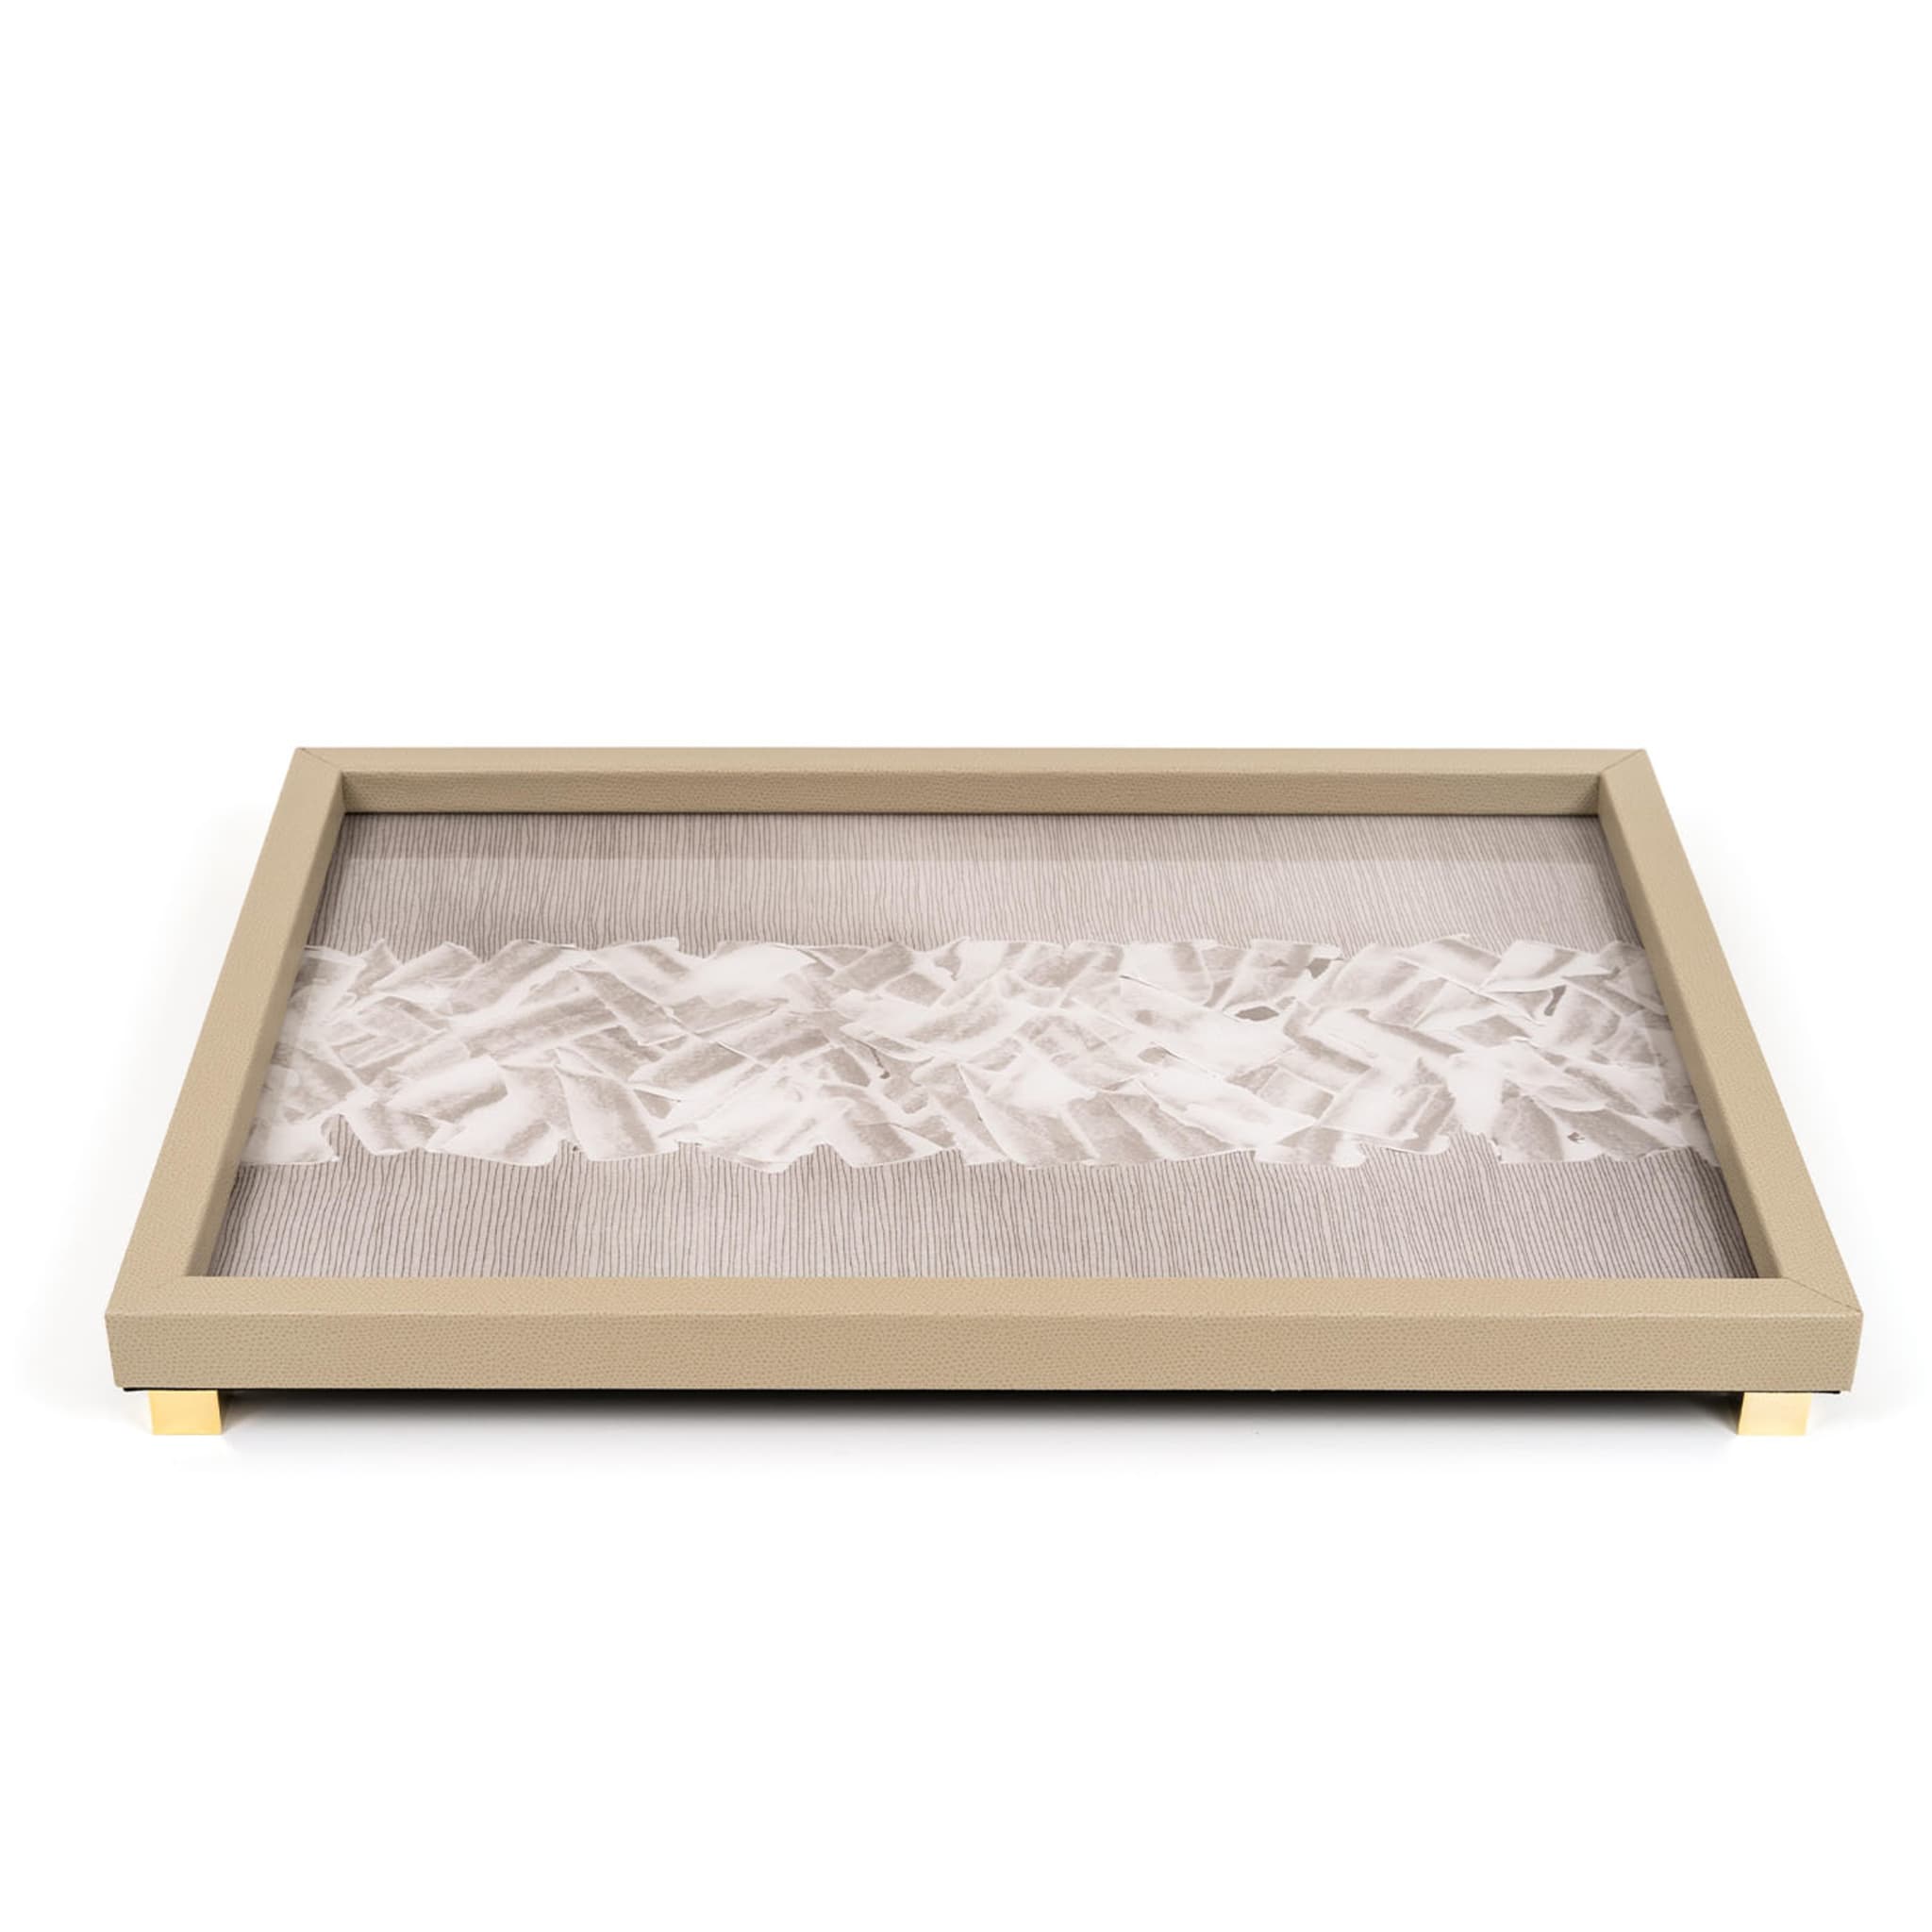 Memo Large Rectangular Footed Taupe Tray - Alternative view 1